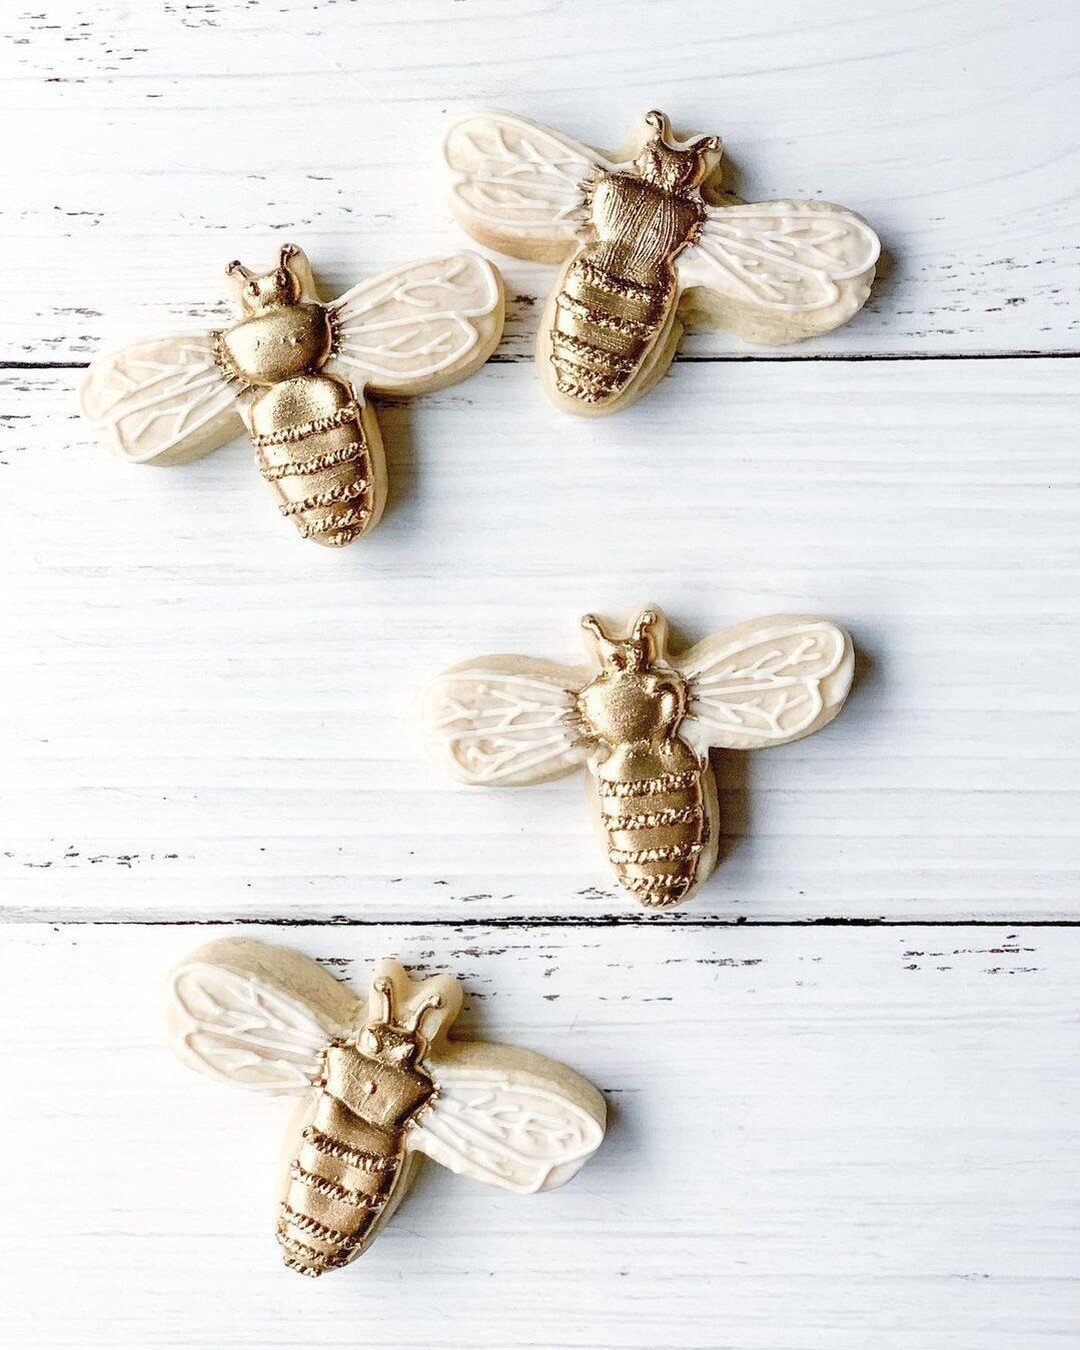 On behalf of all our little workbees, 🐝 we wish you bee-autiful Christmas morning, day and evening! ✨
-
Tag a friend in comments to tell them: ''Bee merry and enjoy yourself.'' 😌
-
Photo by: @bougecookieco
-
#nordichoney #gourmethoney #organicbees 